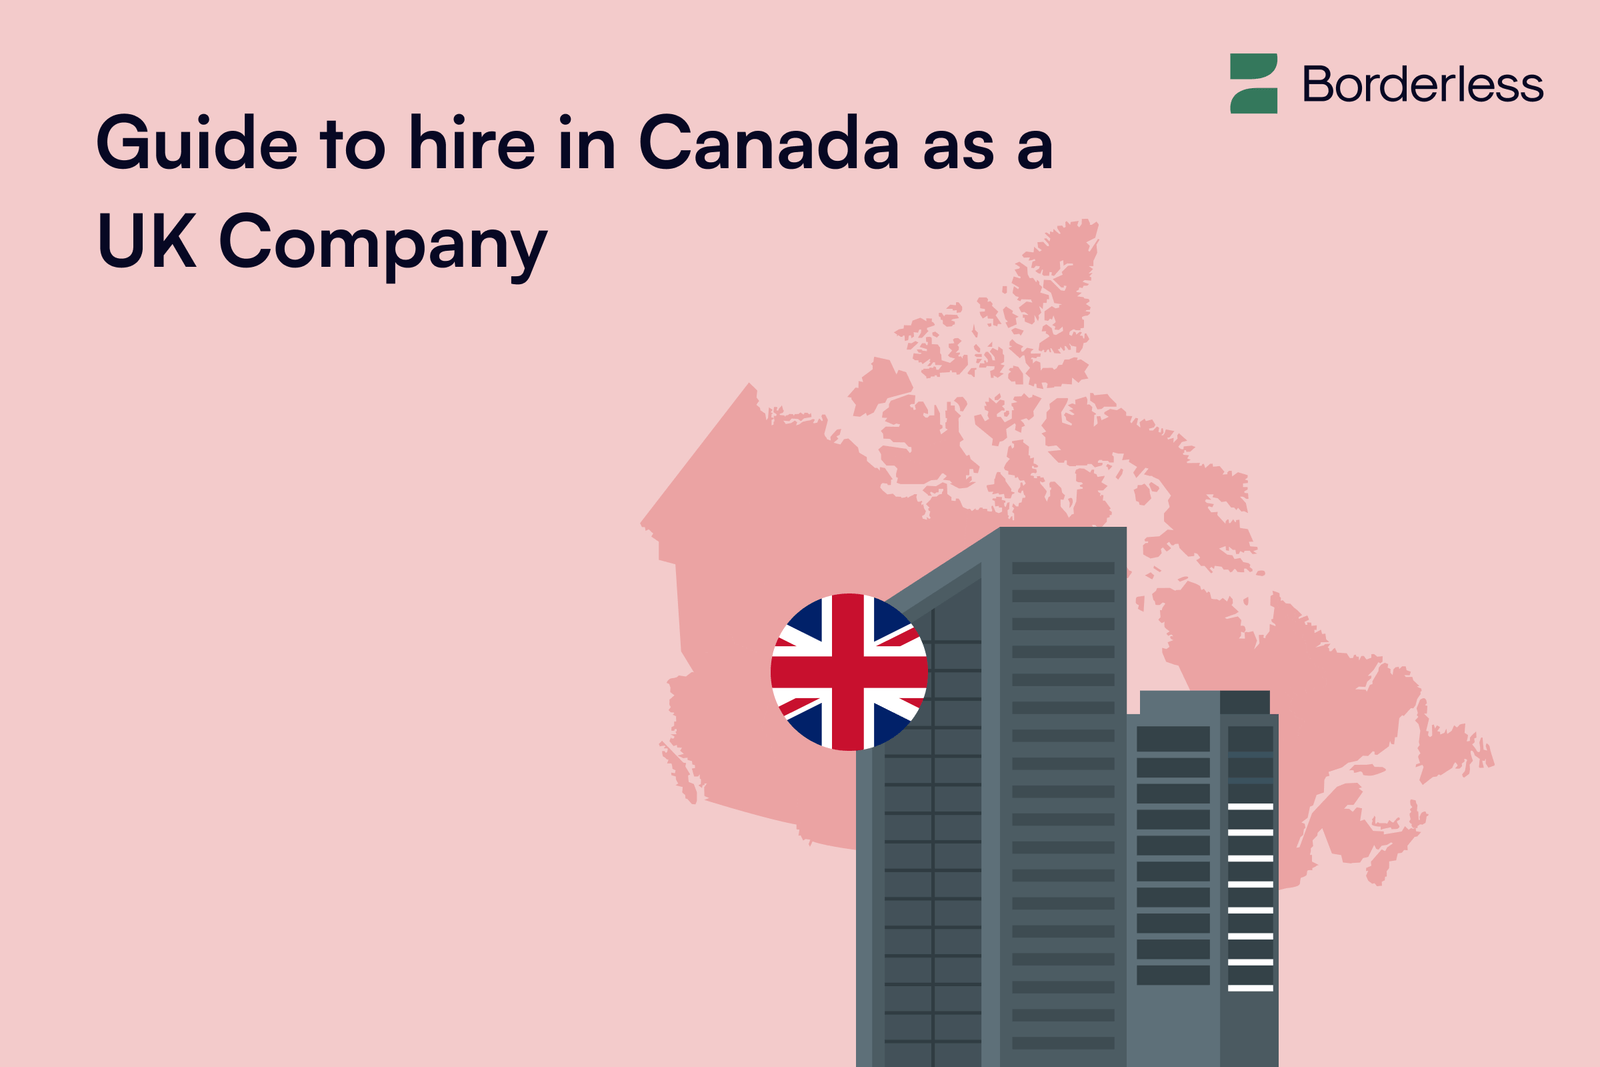 6570c66629b22bfc96101025_Blog_Guide to hire in Canada as a UK company-p-1600